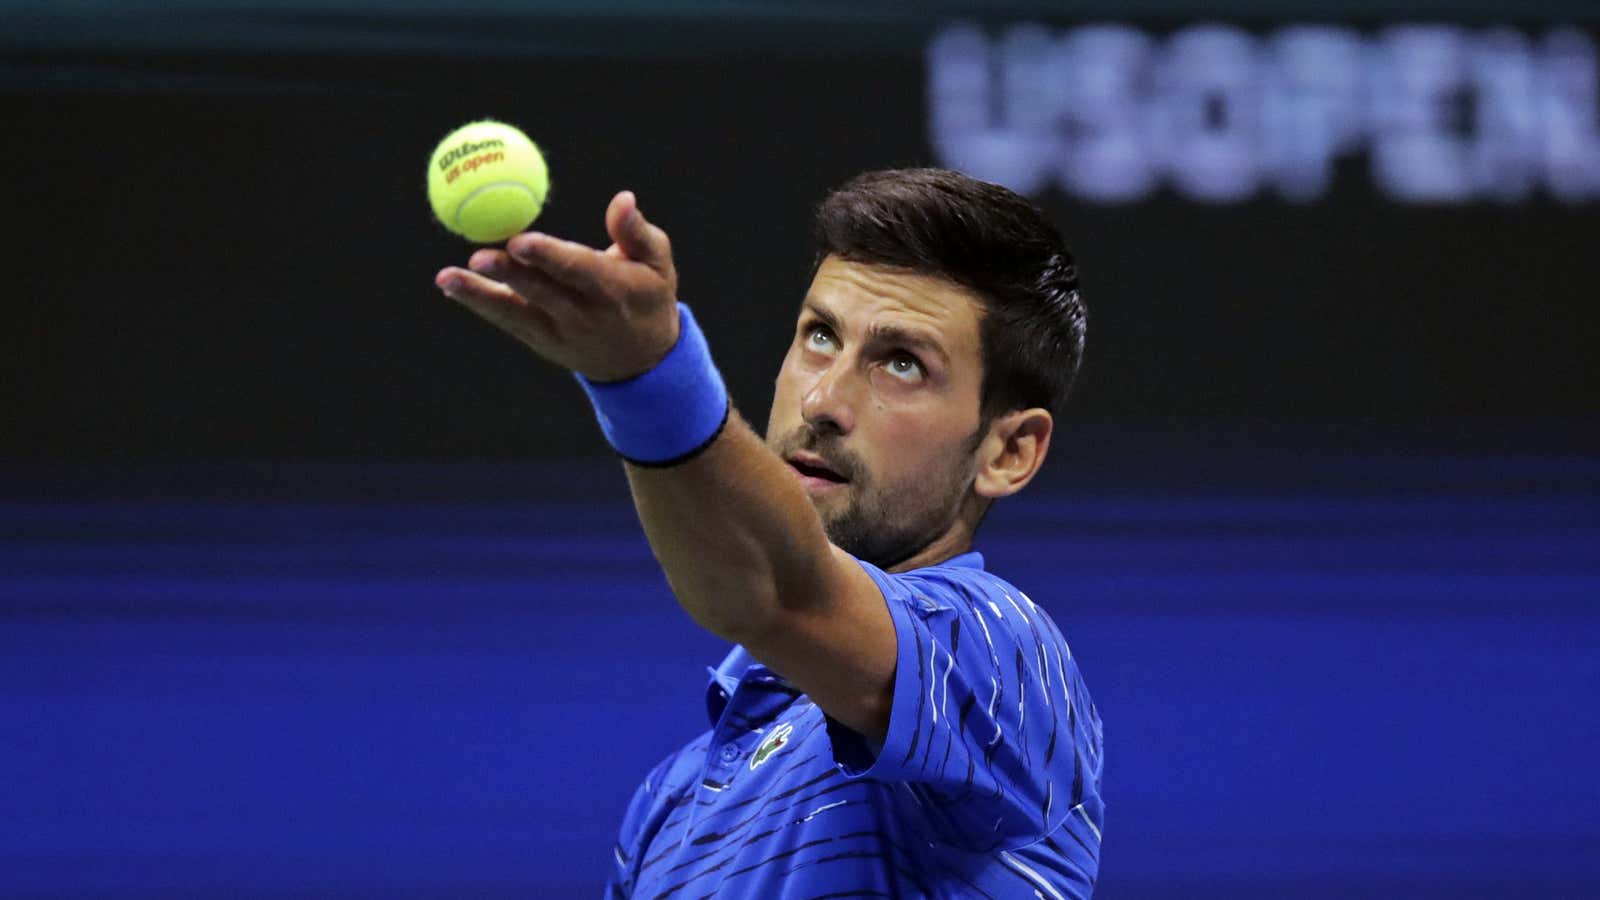 Does the choice of ball matter? “I’m convinced in my head that it does,” says Novak Djokovic.